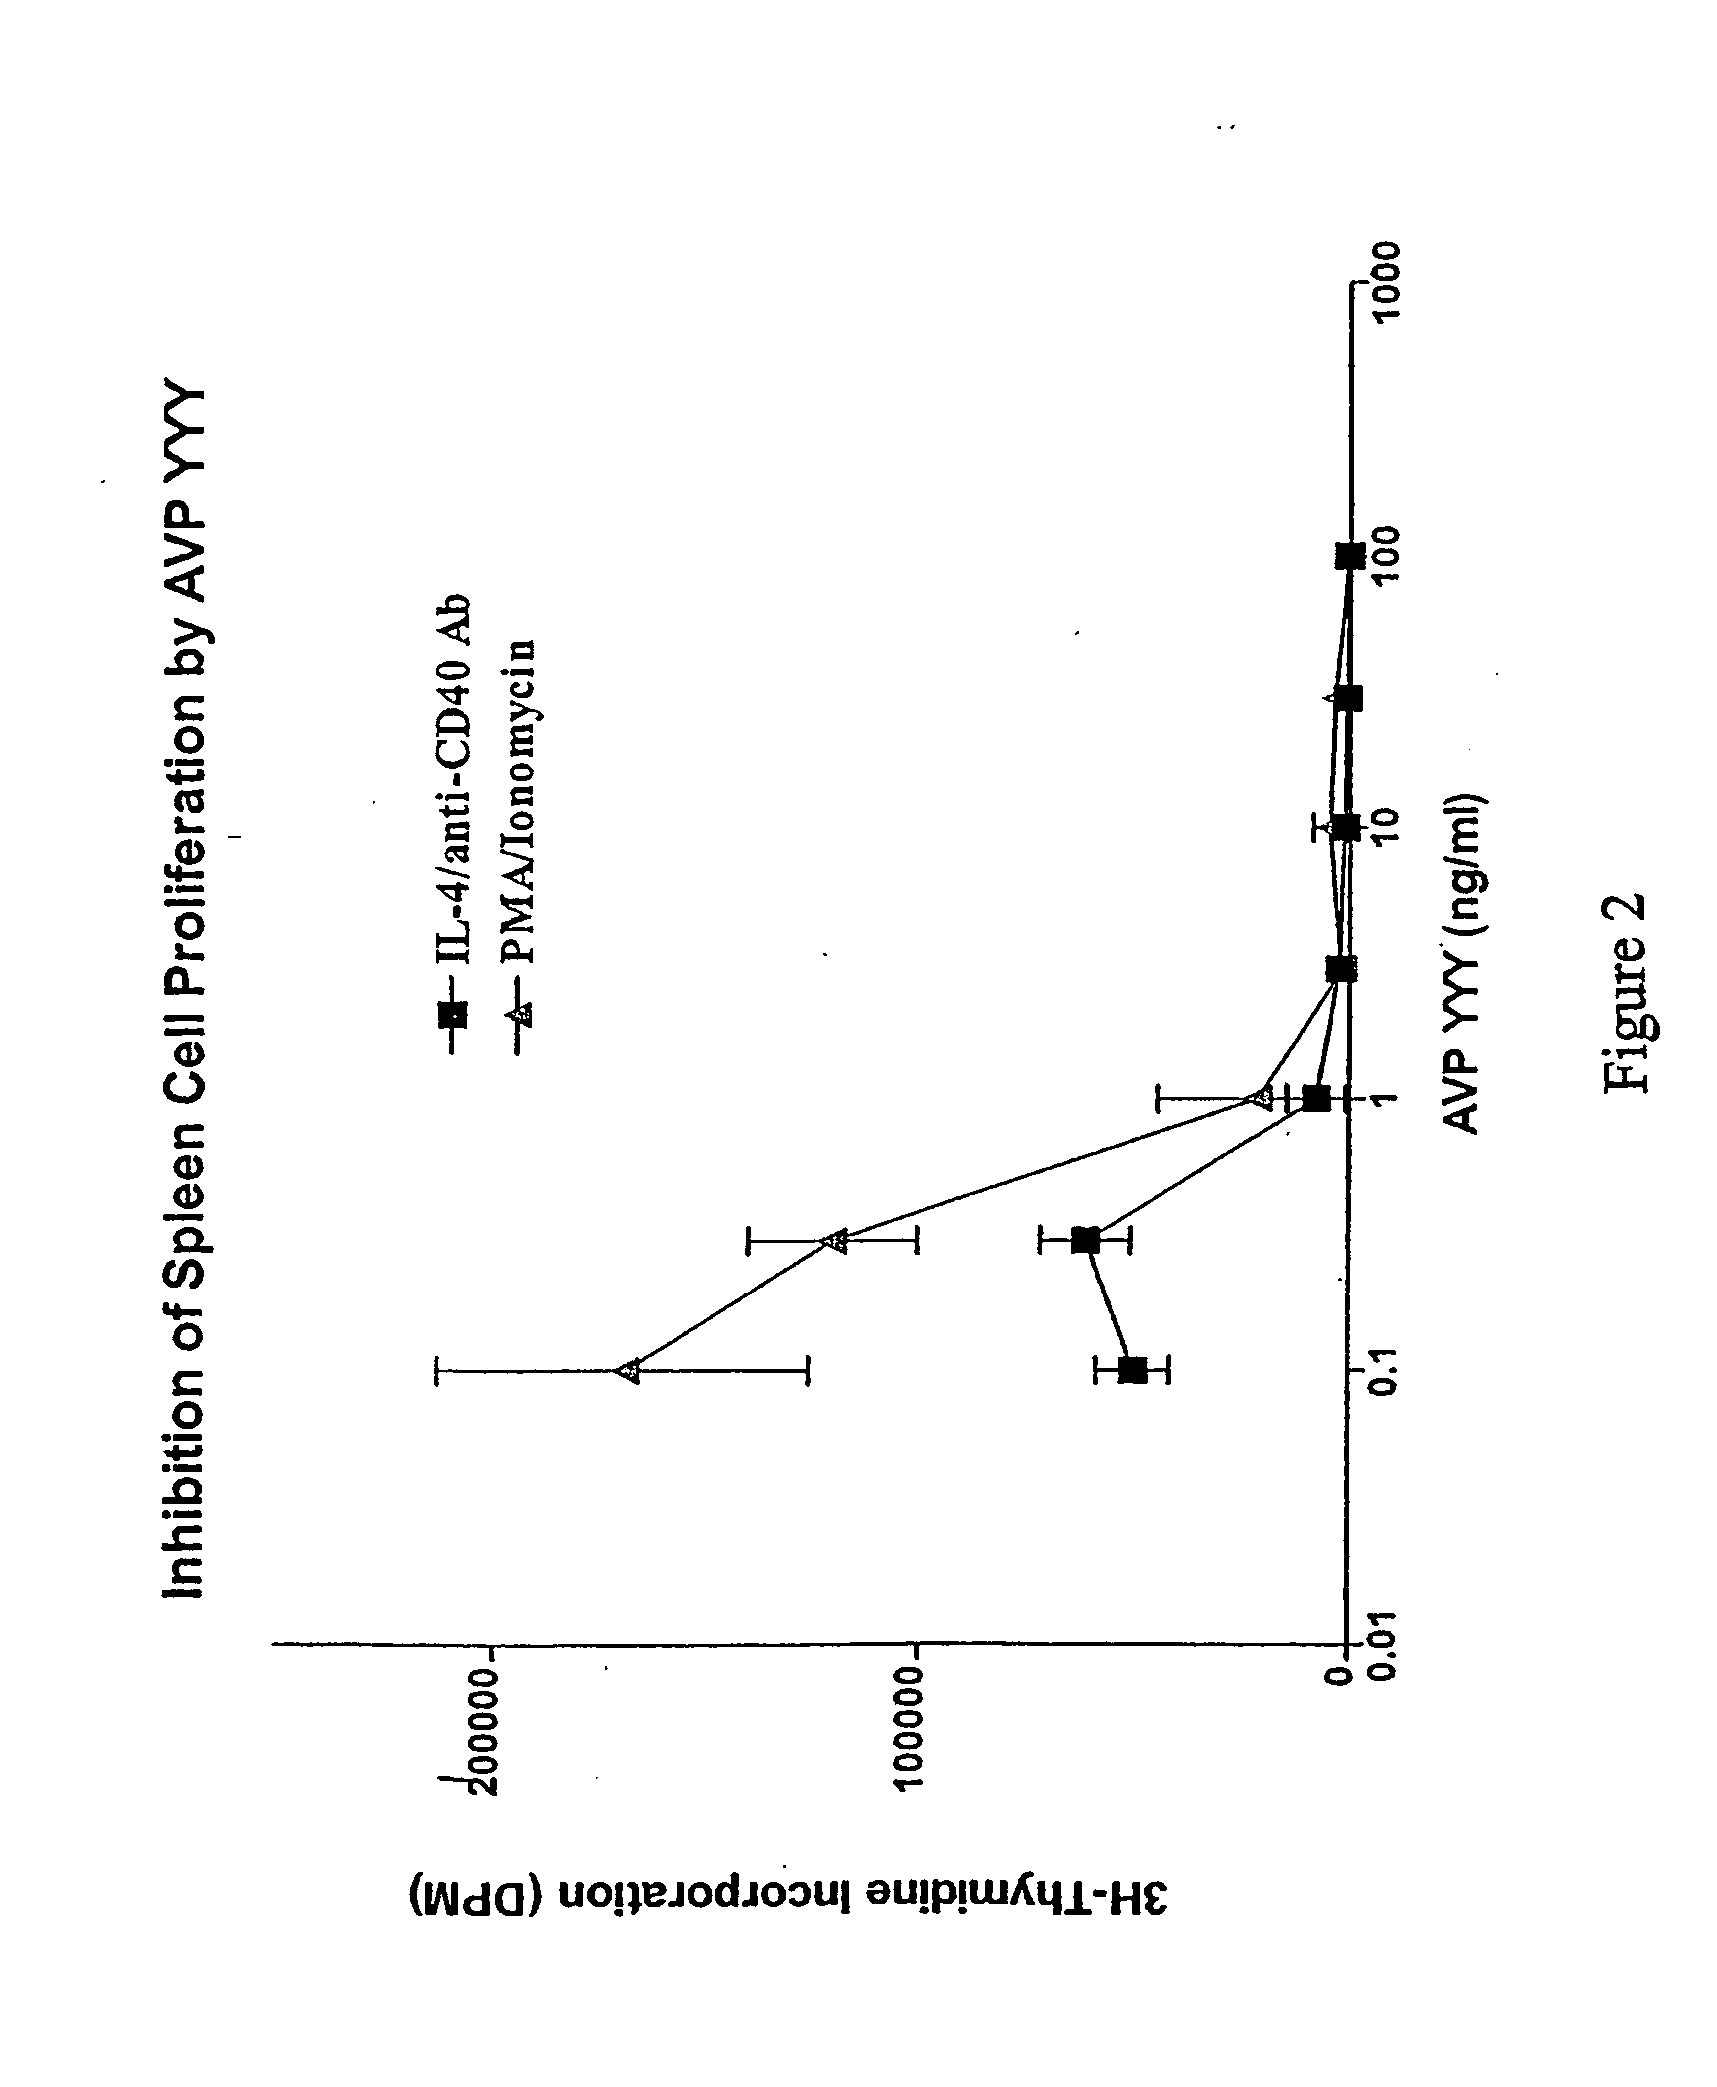 Use of benzimidazole analogs in the treatment of cell proliferation